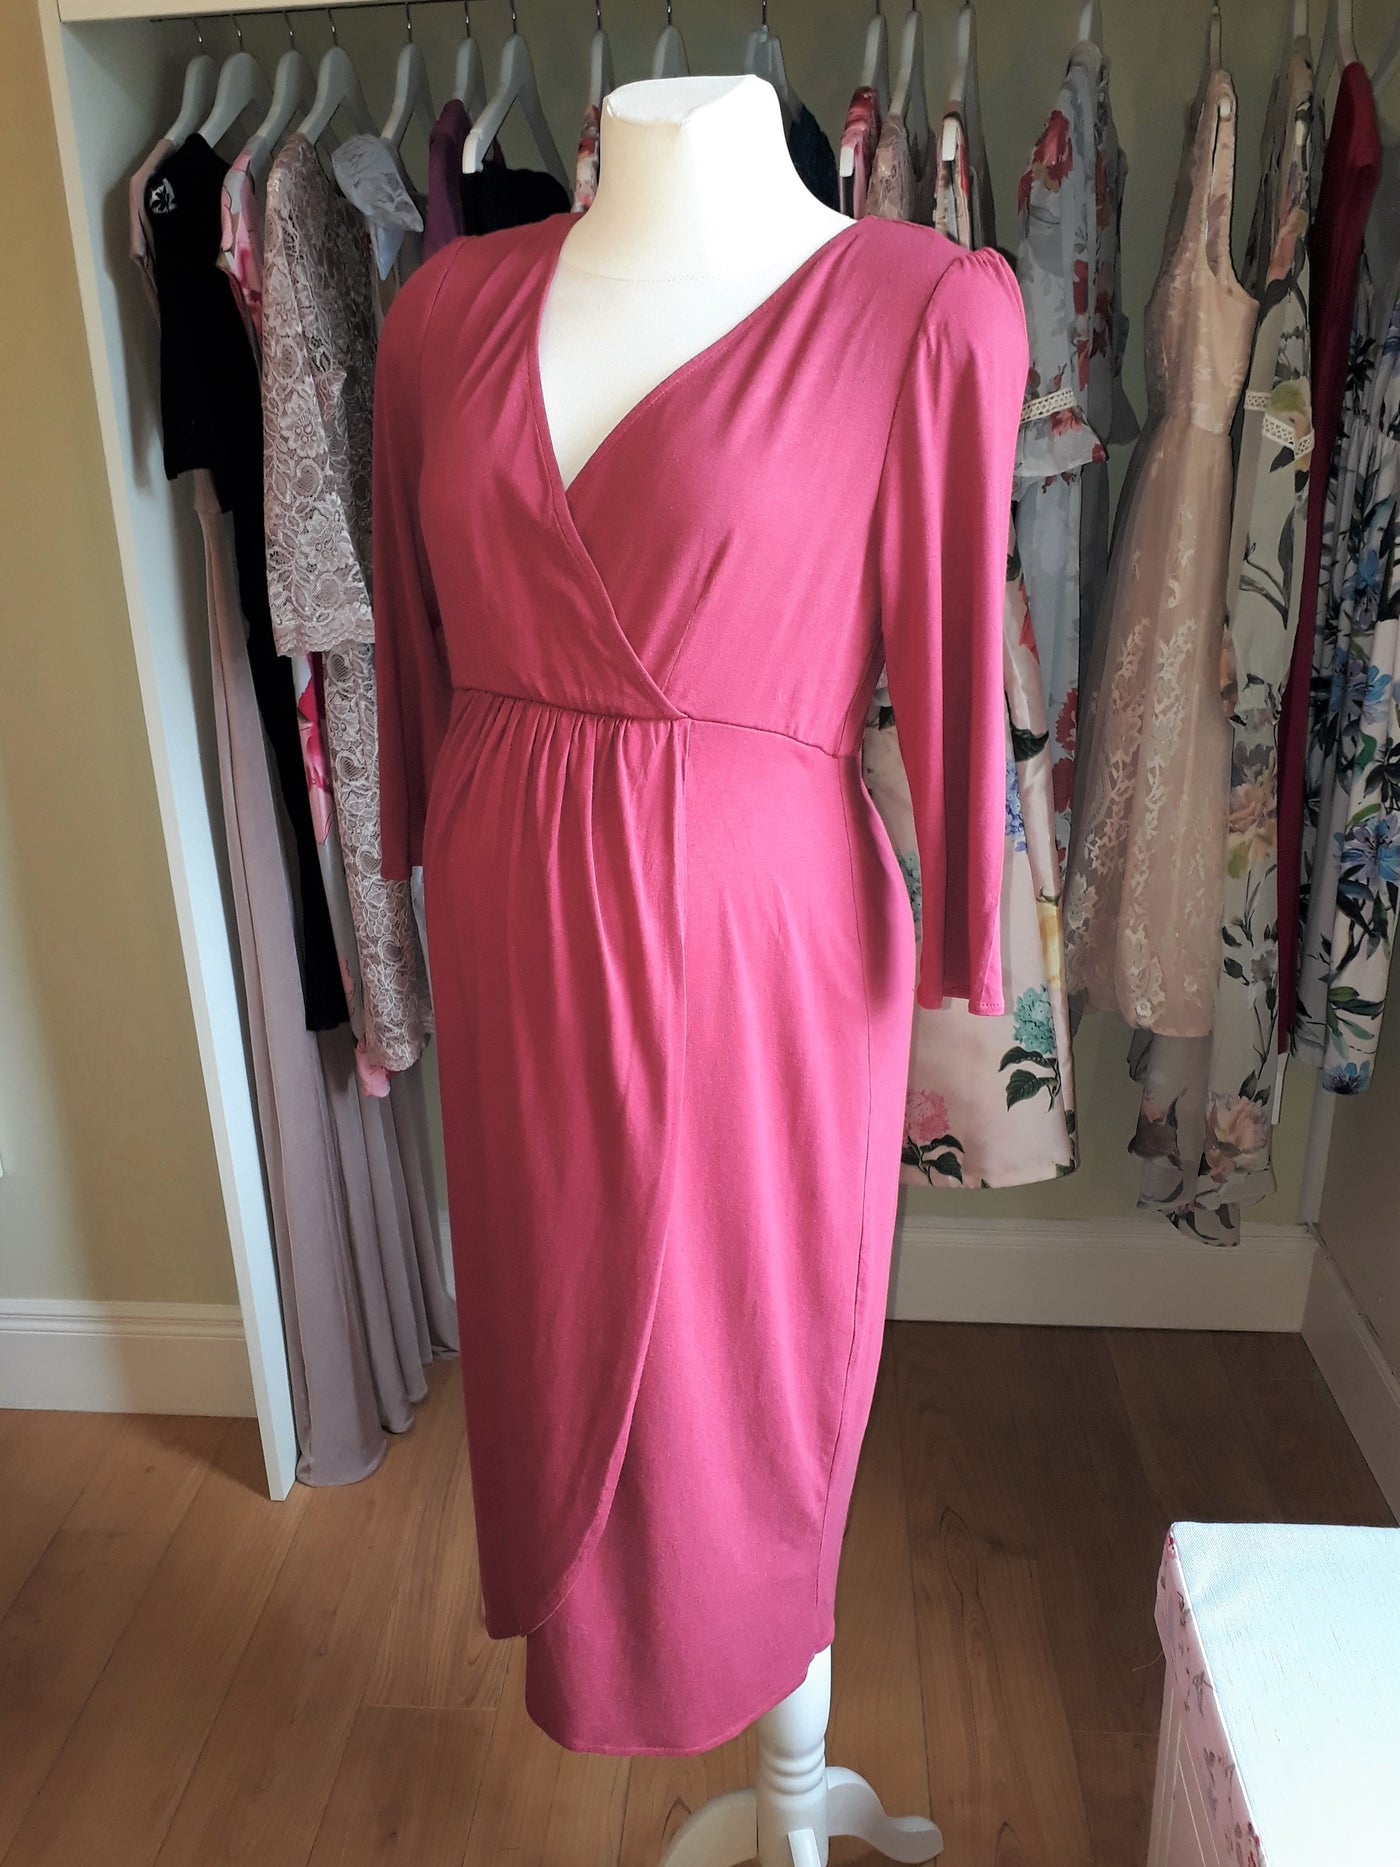 Tiffany Rose Pink Maternity Dress with Sleeves - Size 4 (UK 14/16)